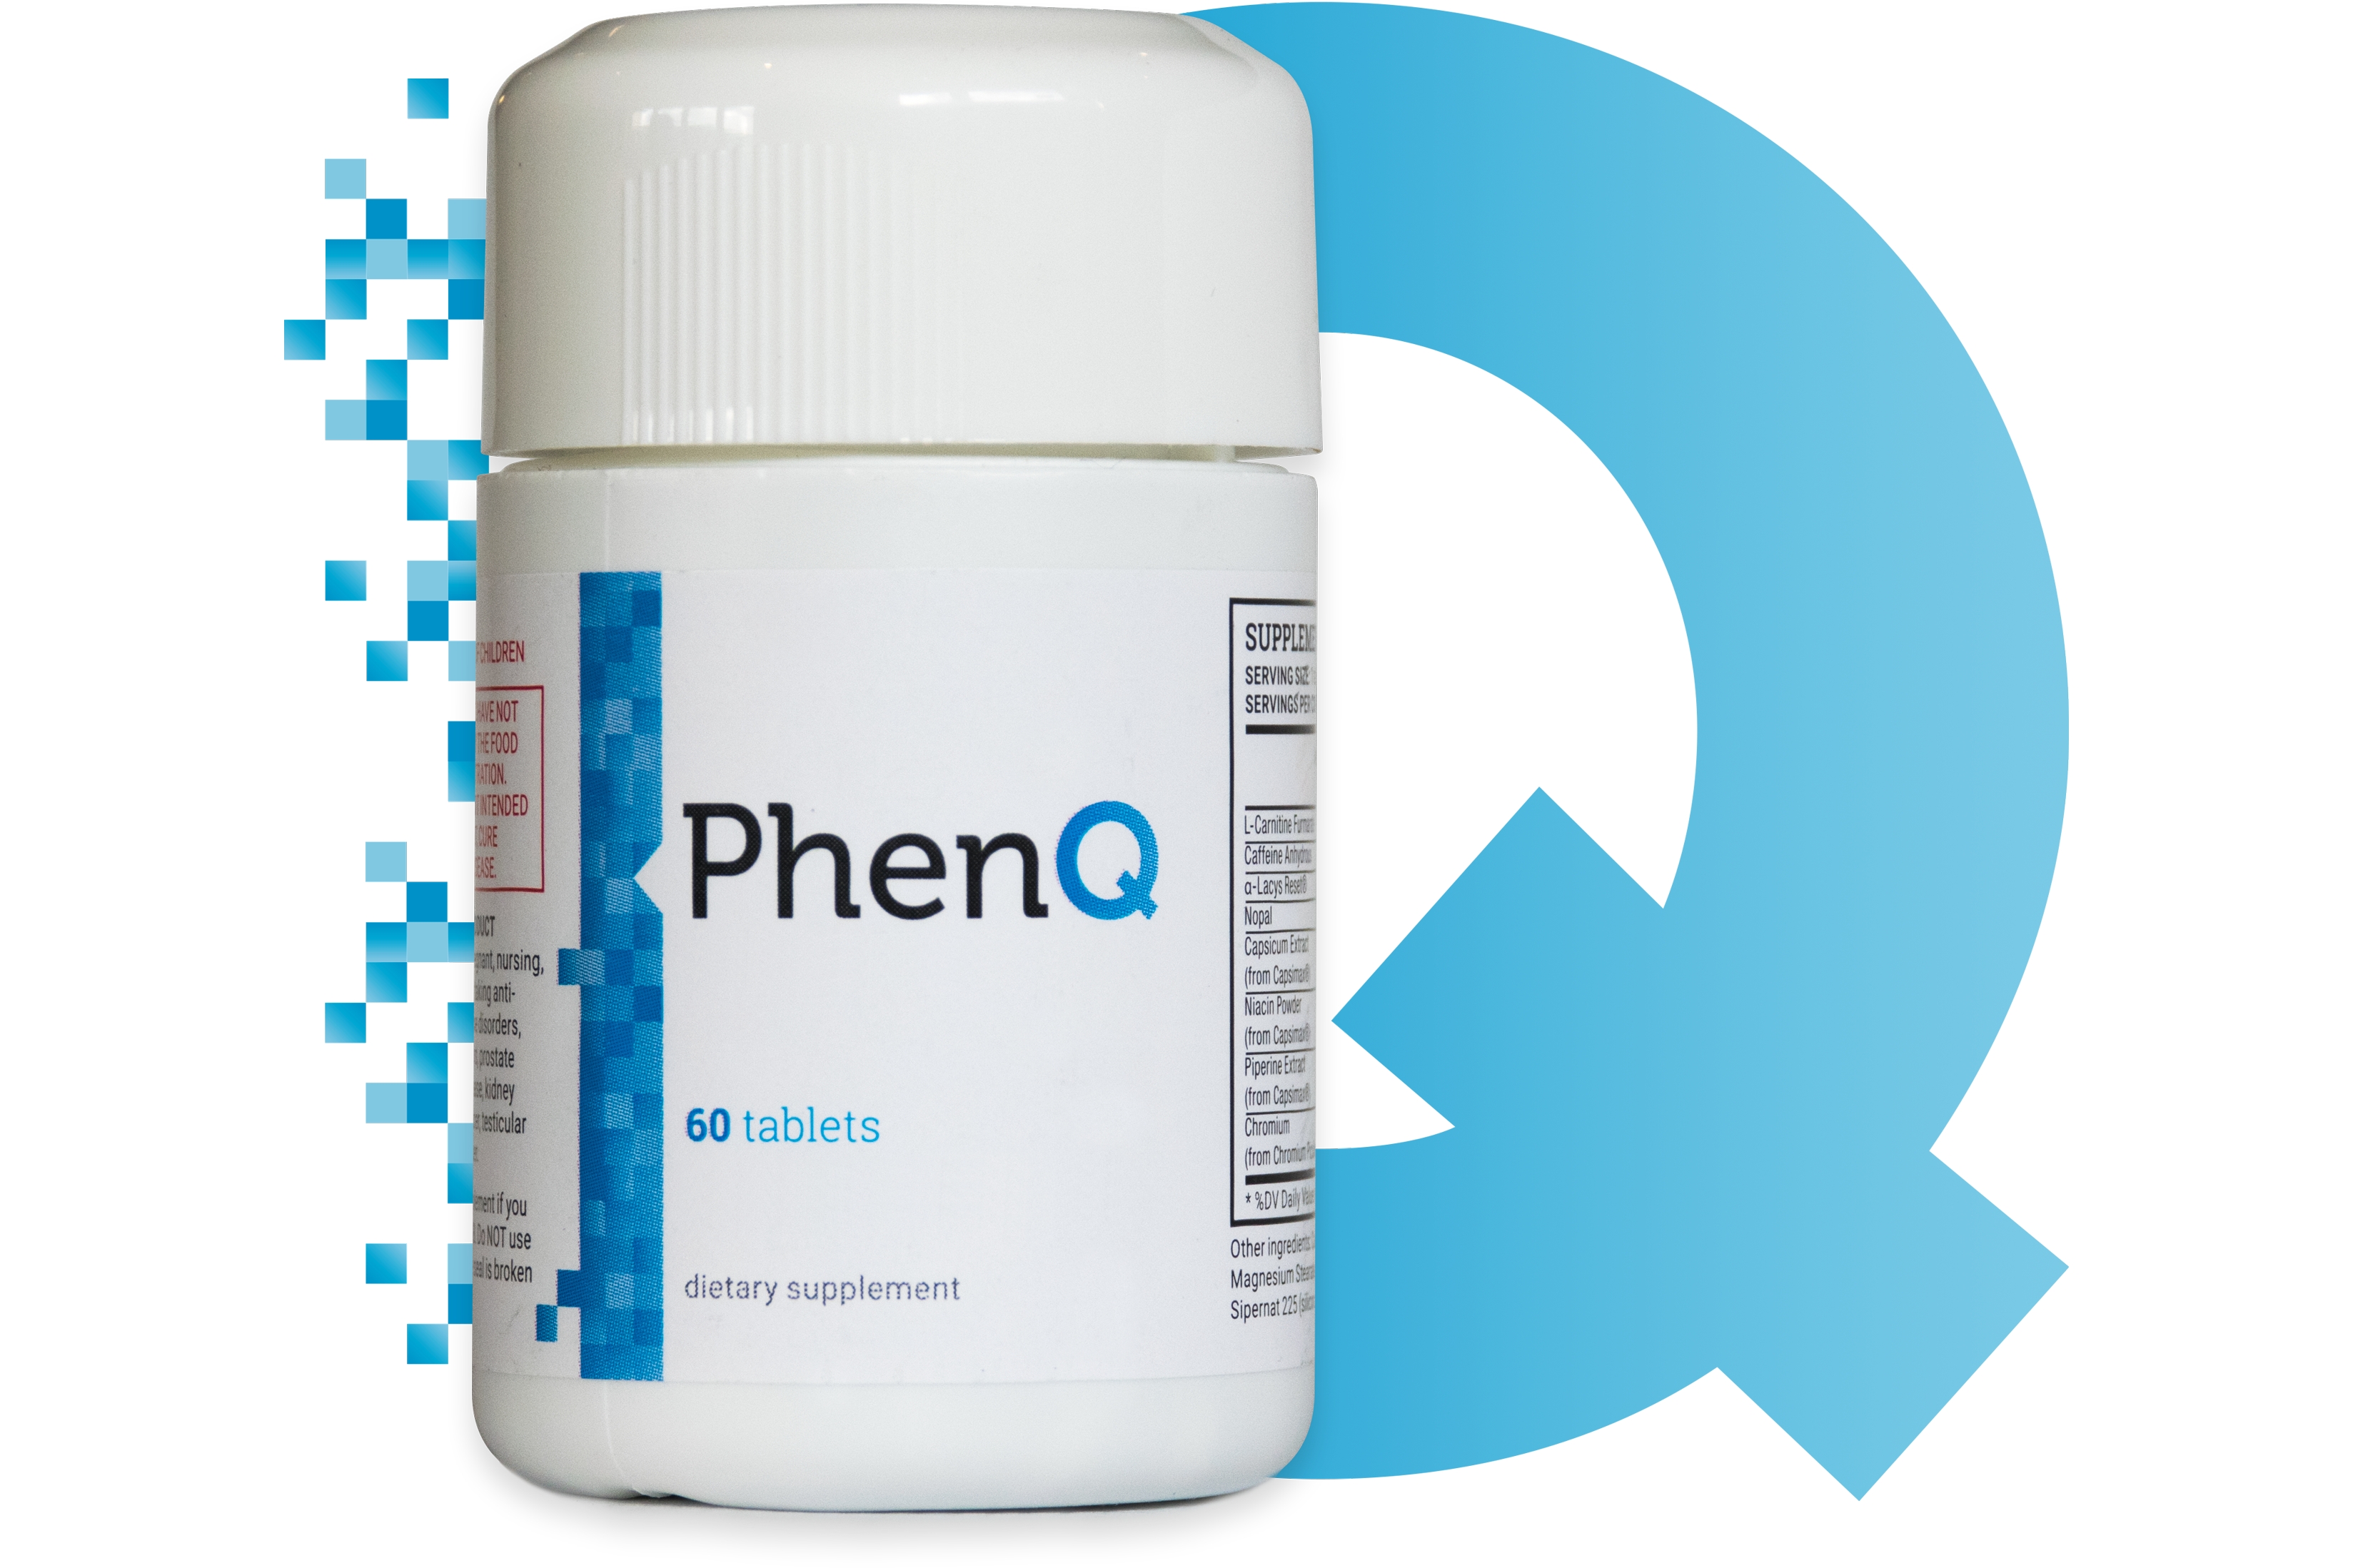 PhenQ fast weight loss product and improve health.